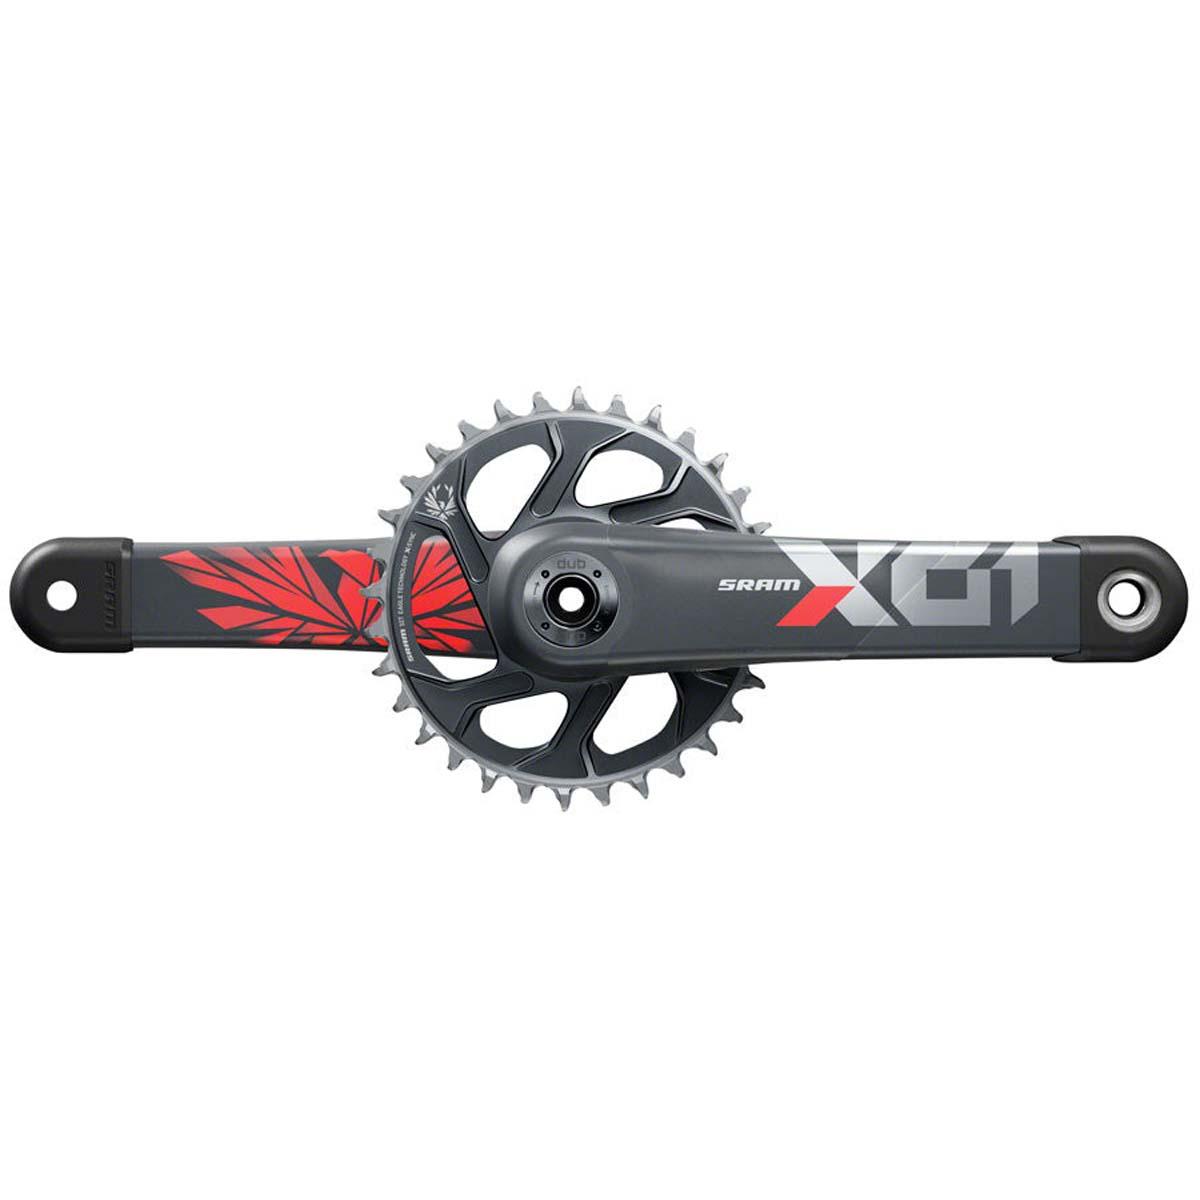 SRAM X01 Eagle Boost Crankset - 175mm 12-Speed 32t Direct Mount DUB Spindle Interface Lunar/Oxy Red C2